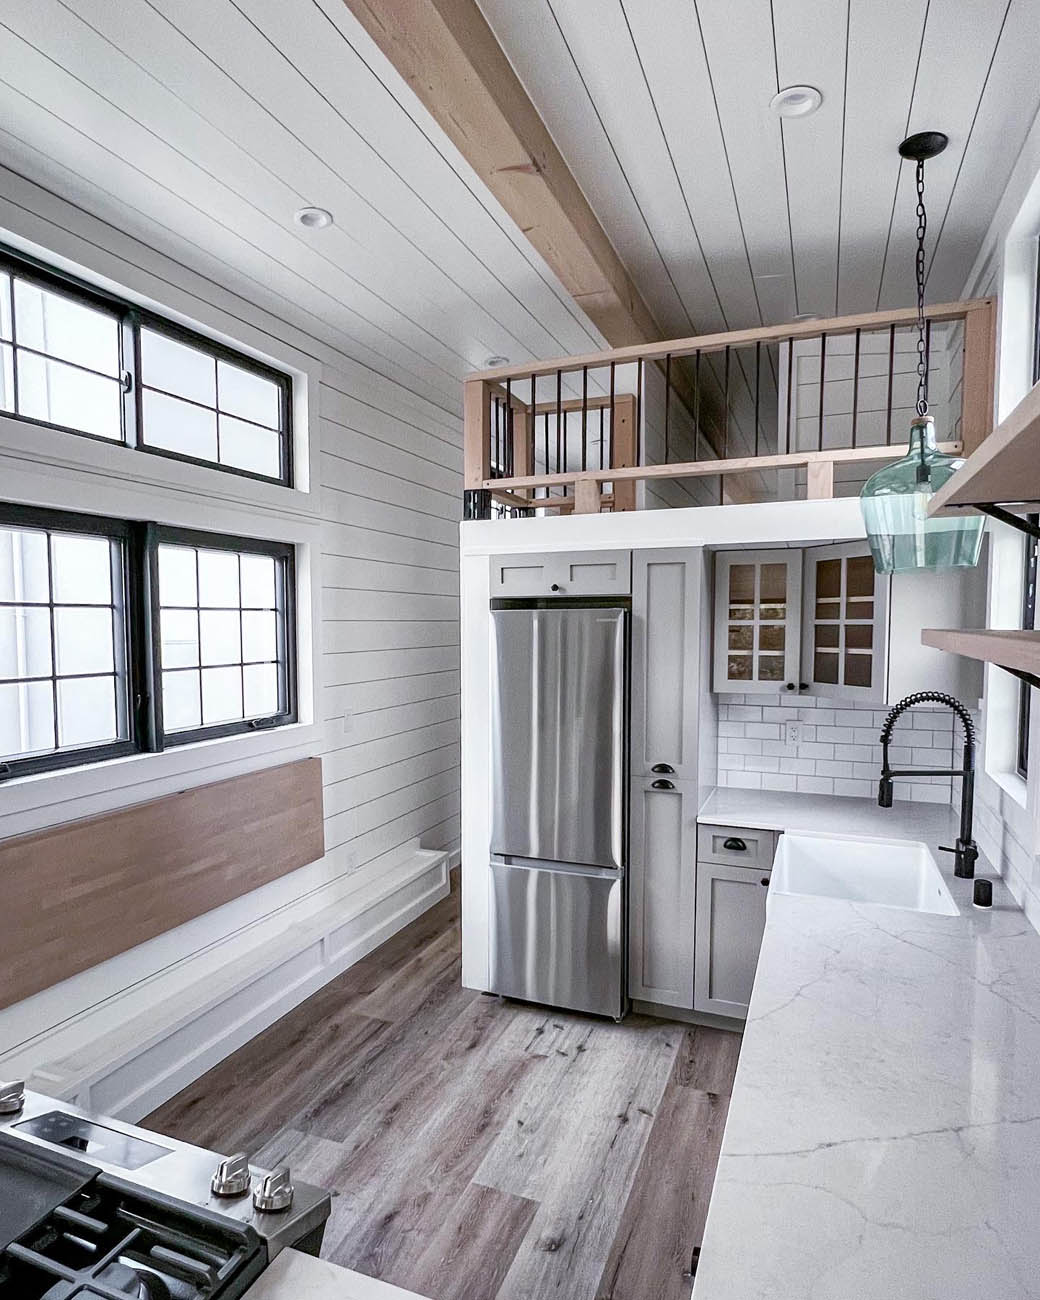 Inside a tiny ADU kitchen with a bedding loft, provided by Anchored Tiny Homes custom small home builder in Sacramento.